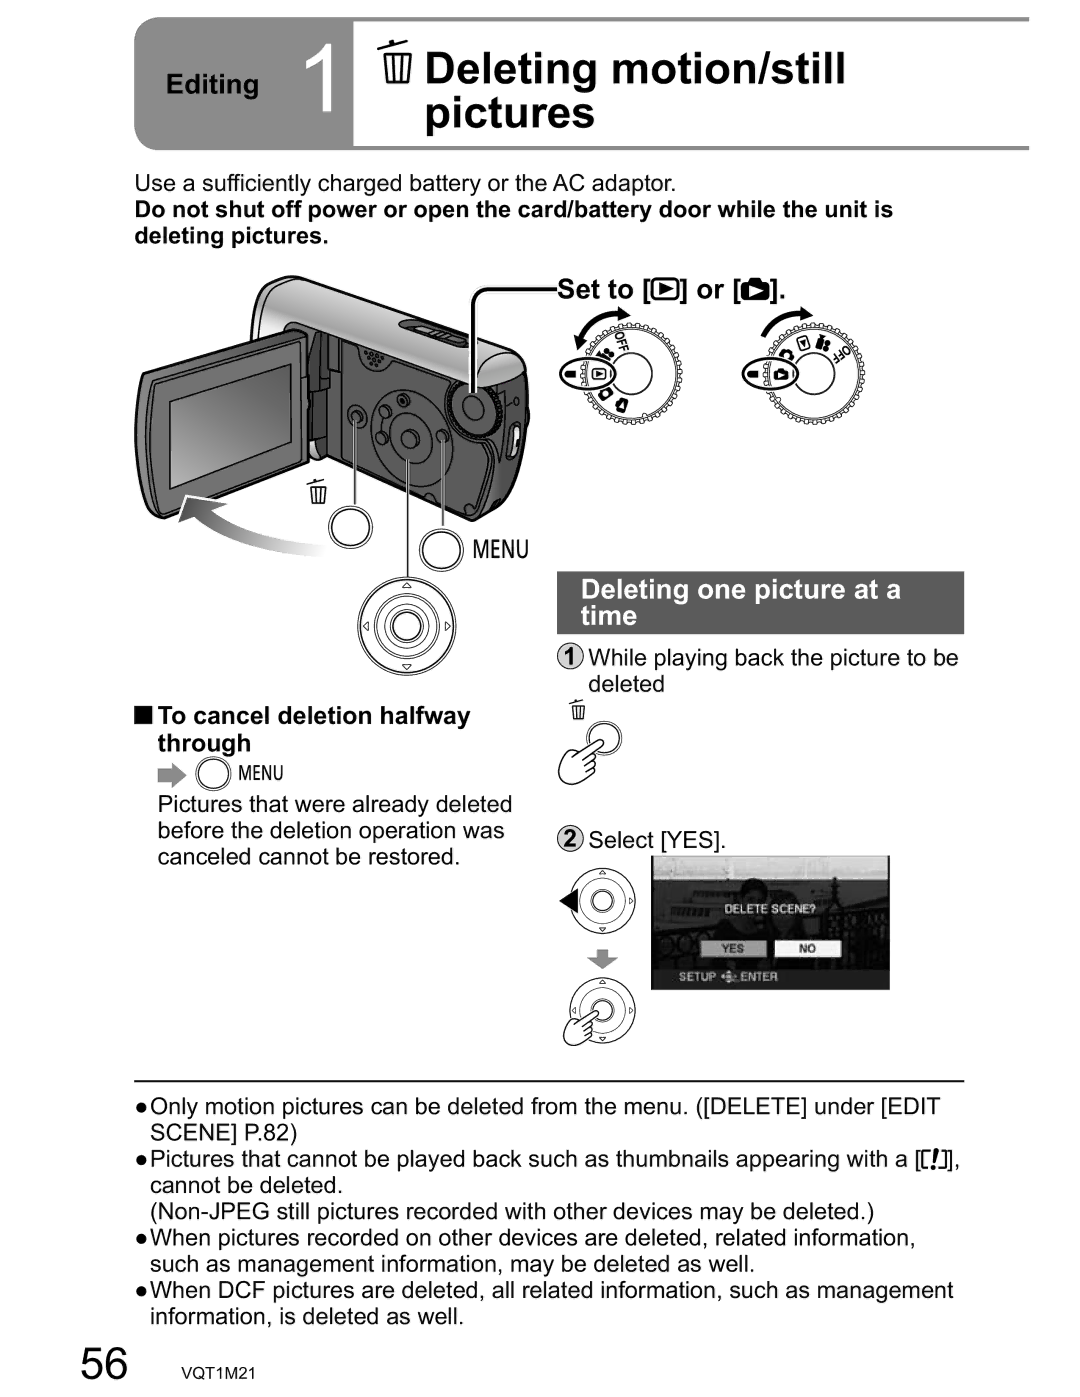 Panasonic SDR-SW20PC operating instructions Editing 1 Deletingpictures motion/still, Deleting one picture at a Time 